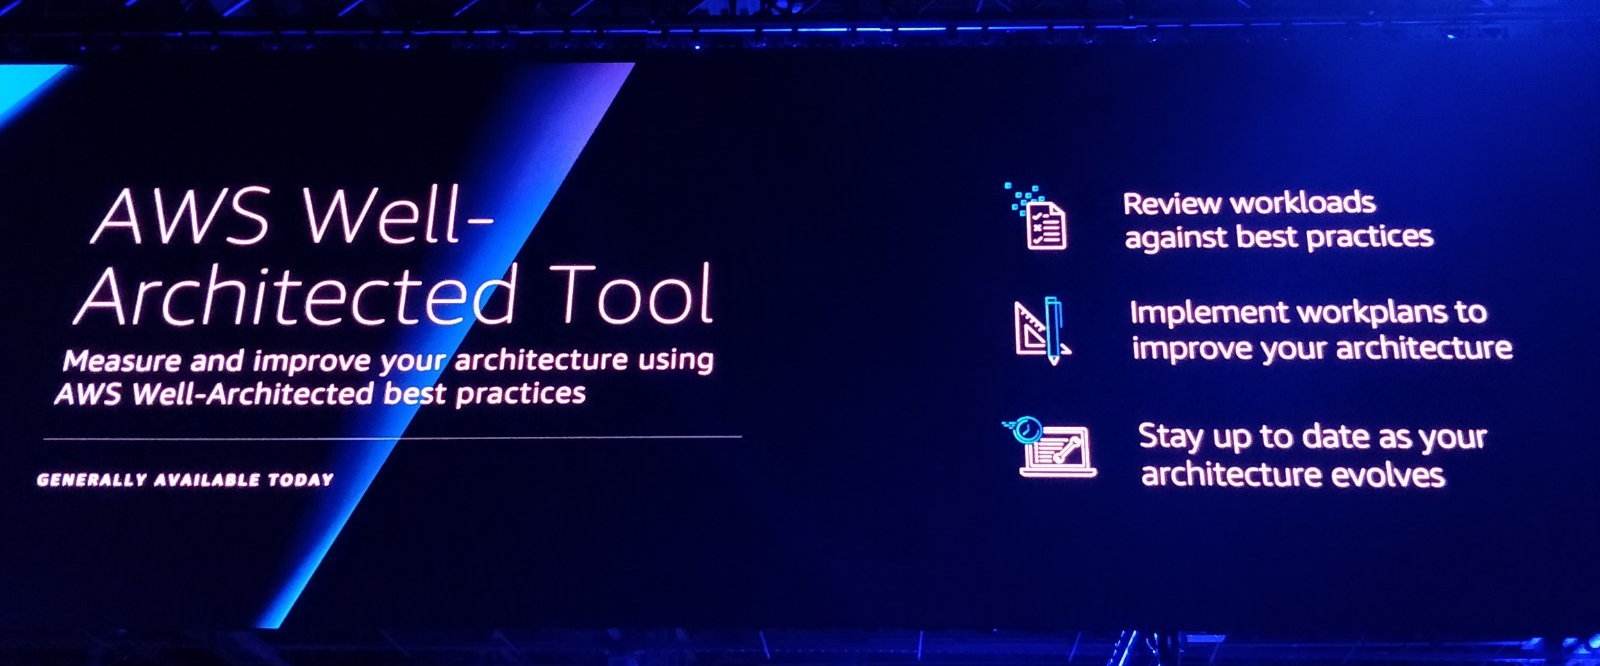 aws-well-architected-tool